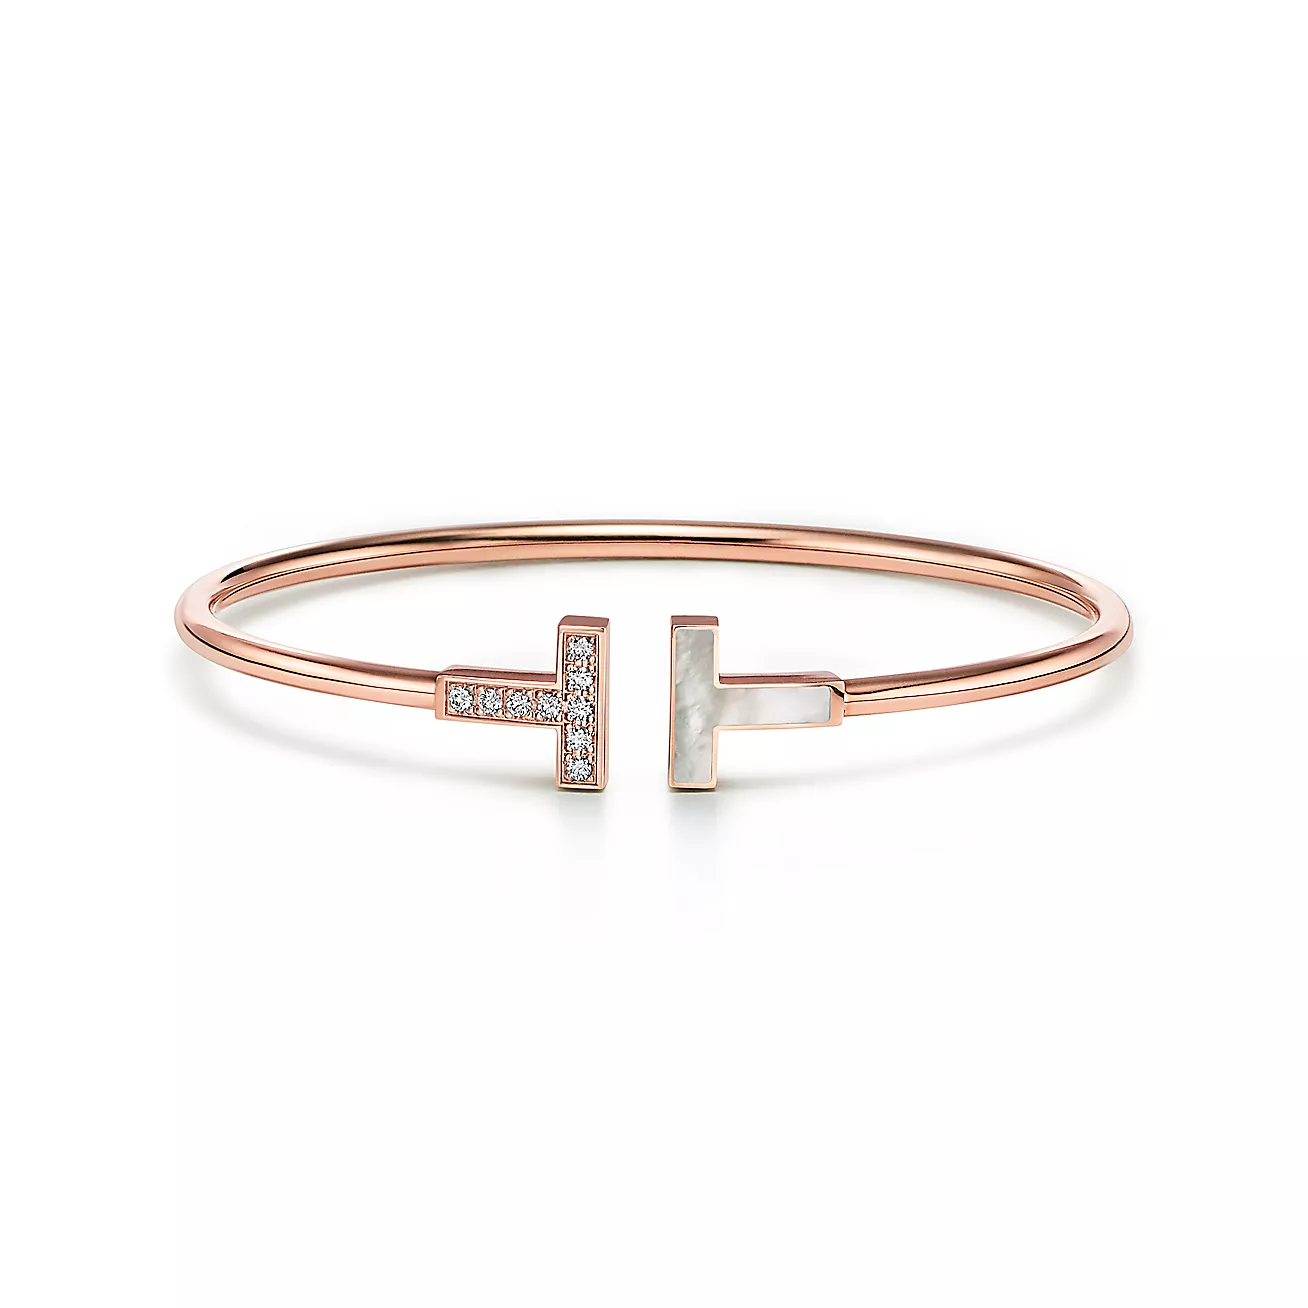 Tiffany T Bracelet in Rose Gold with Mother-of-pearl and Diamond